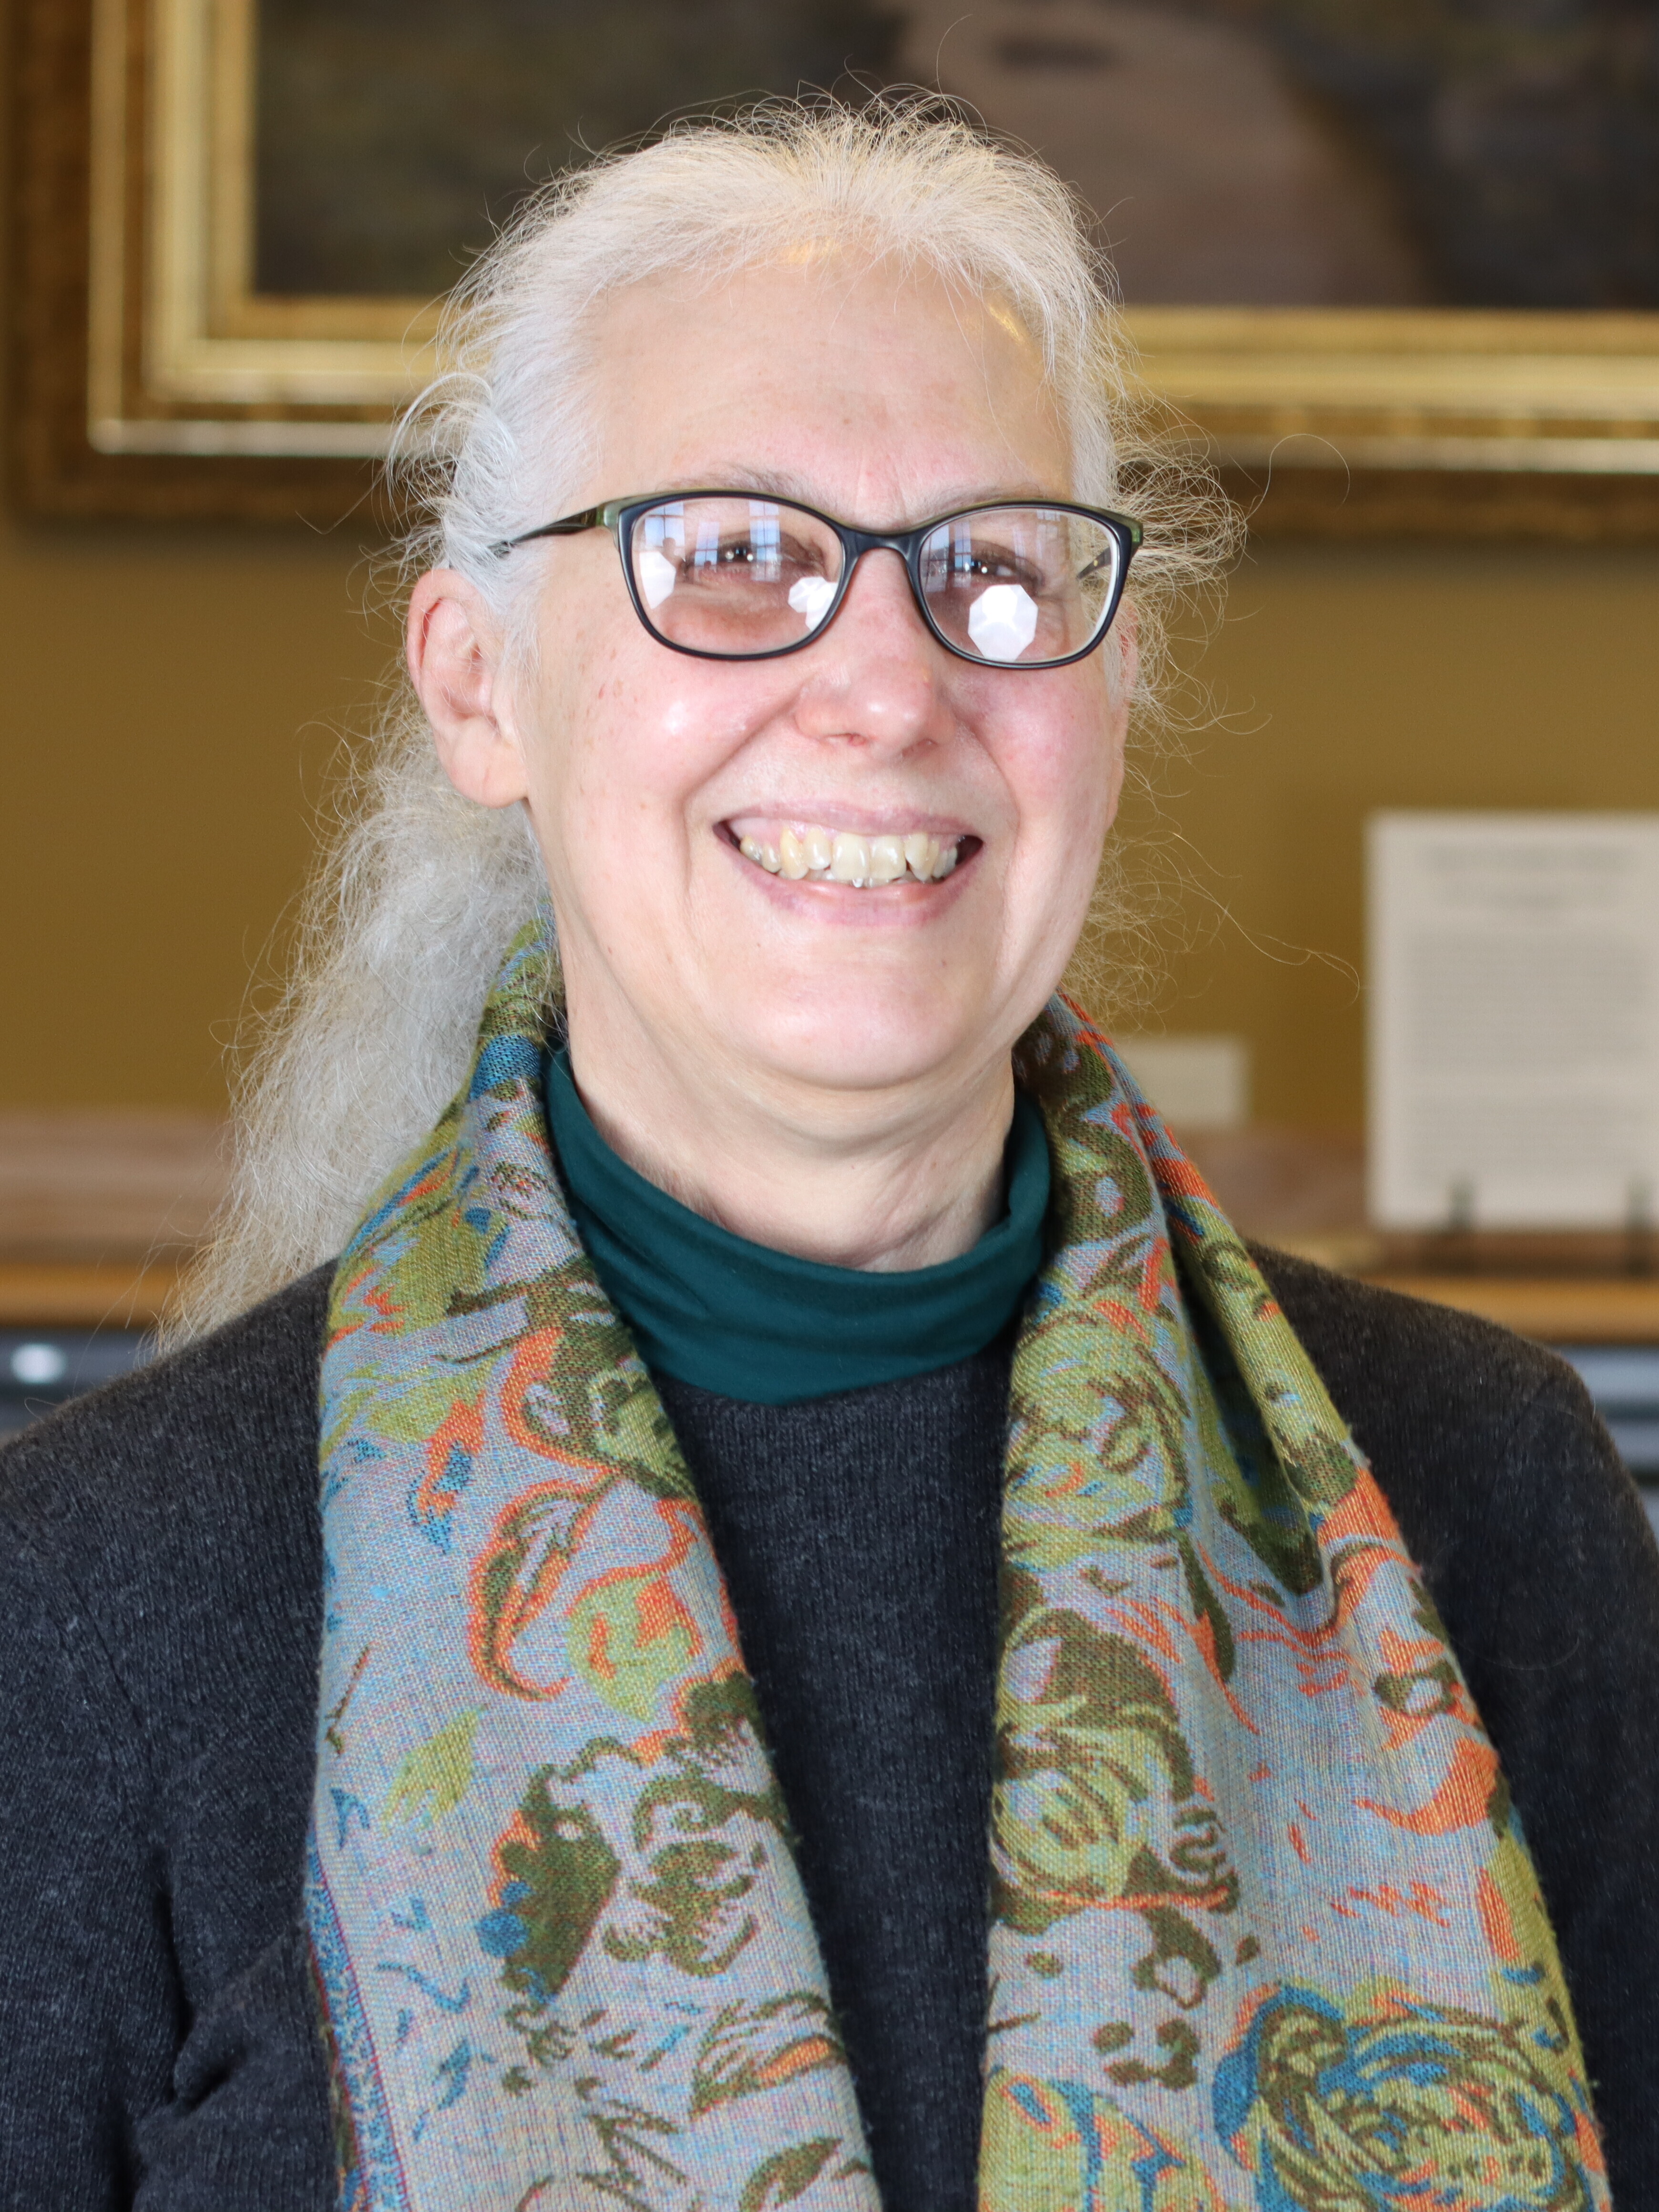 A white-haired woman with glasses smiles at the camera. She's wearing a black shirt with a red/orange/blue/green/gray scarf